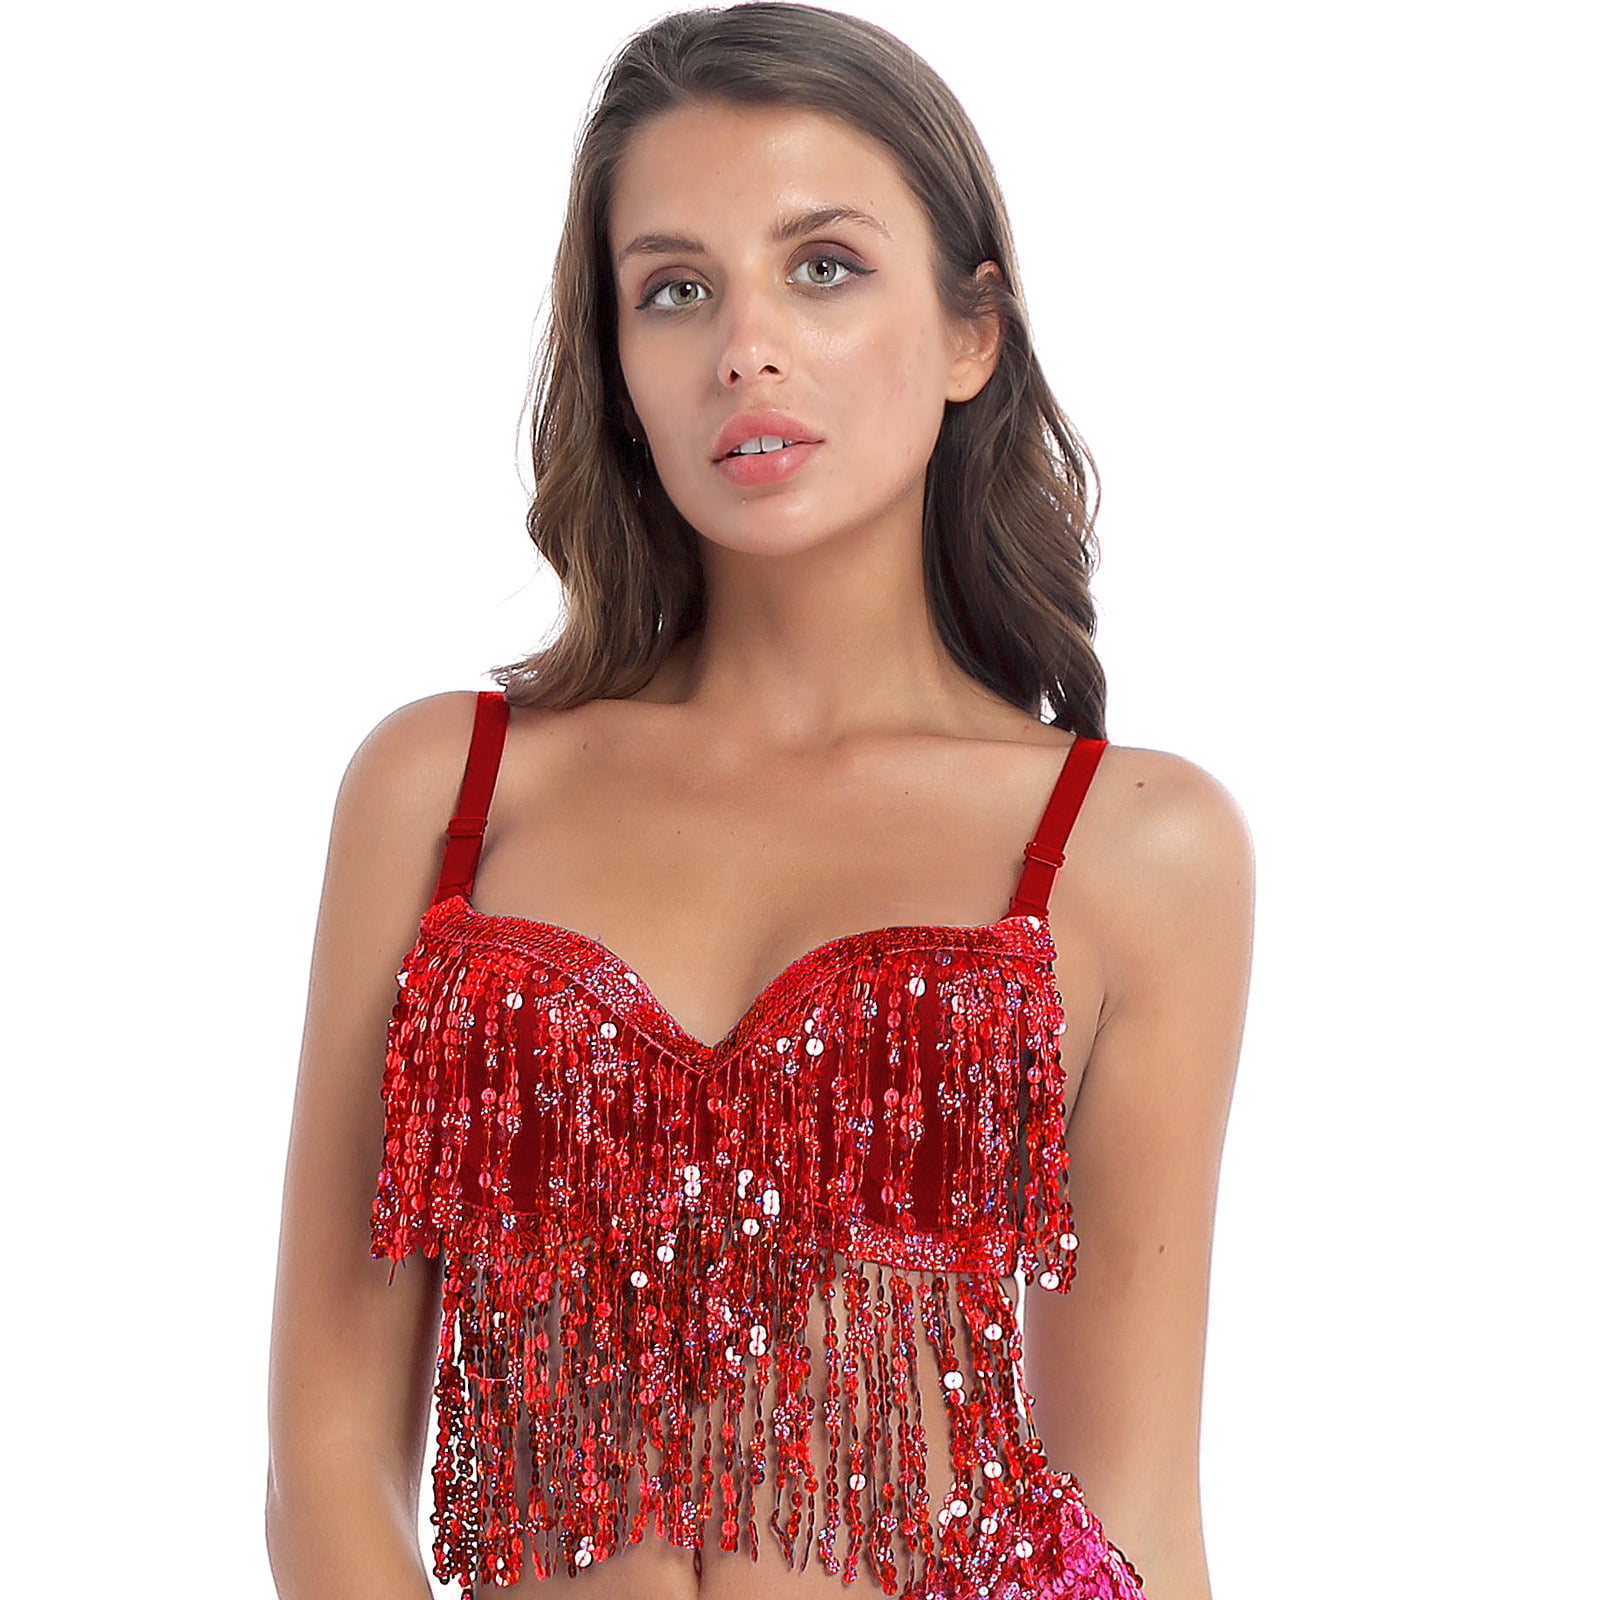 Shimmering Sequin Belly Dance Cacique Bras Top With Tassel And Rhinestones  For Women Perfect For Latin Jazz, Club Parties, And Stage Performances From  Baonuan, $19.37